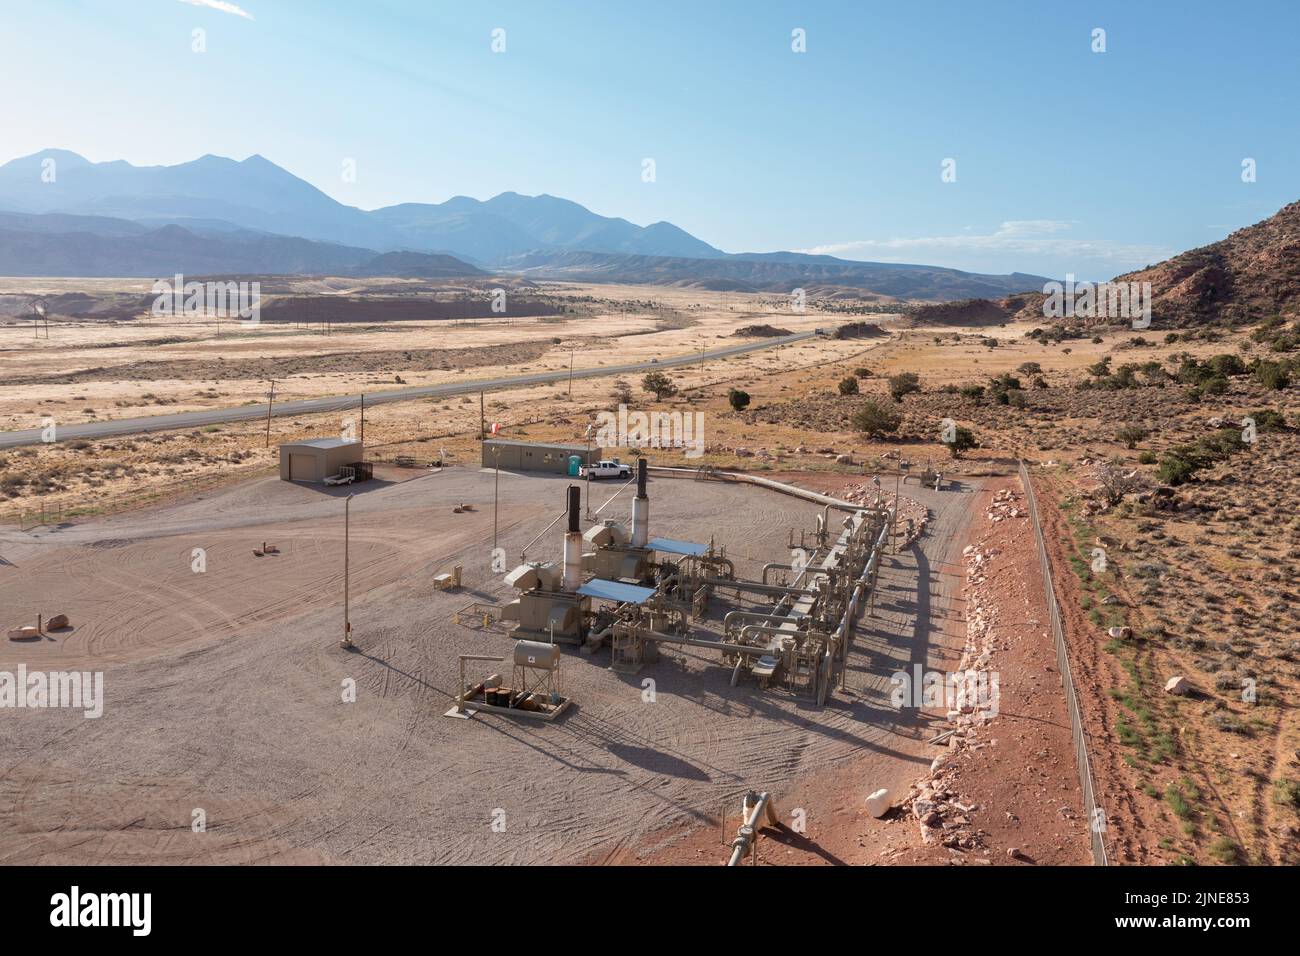 A small compressor station for an 12' LNG or liquified natural gas pipeline in Spanish Valley, near Moab, Utah. Stock Photo